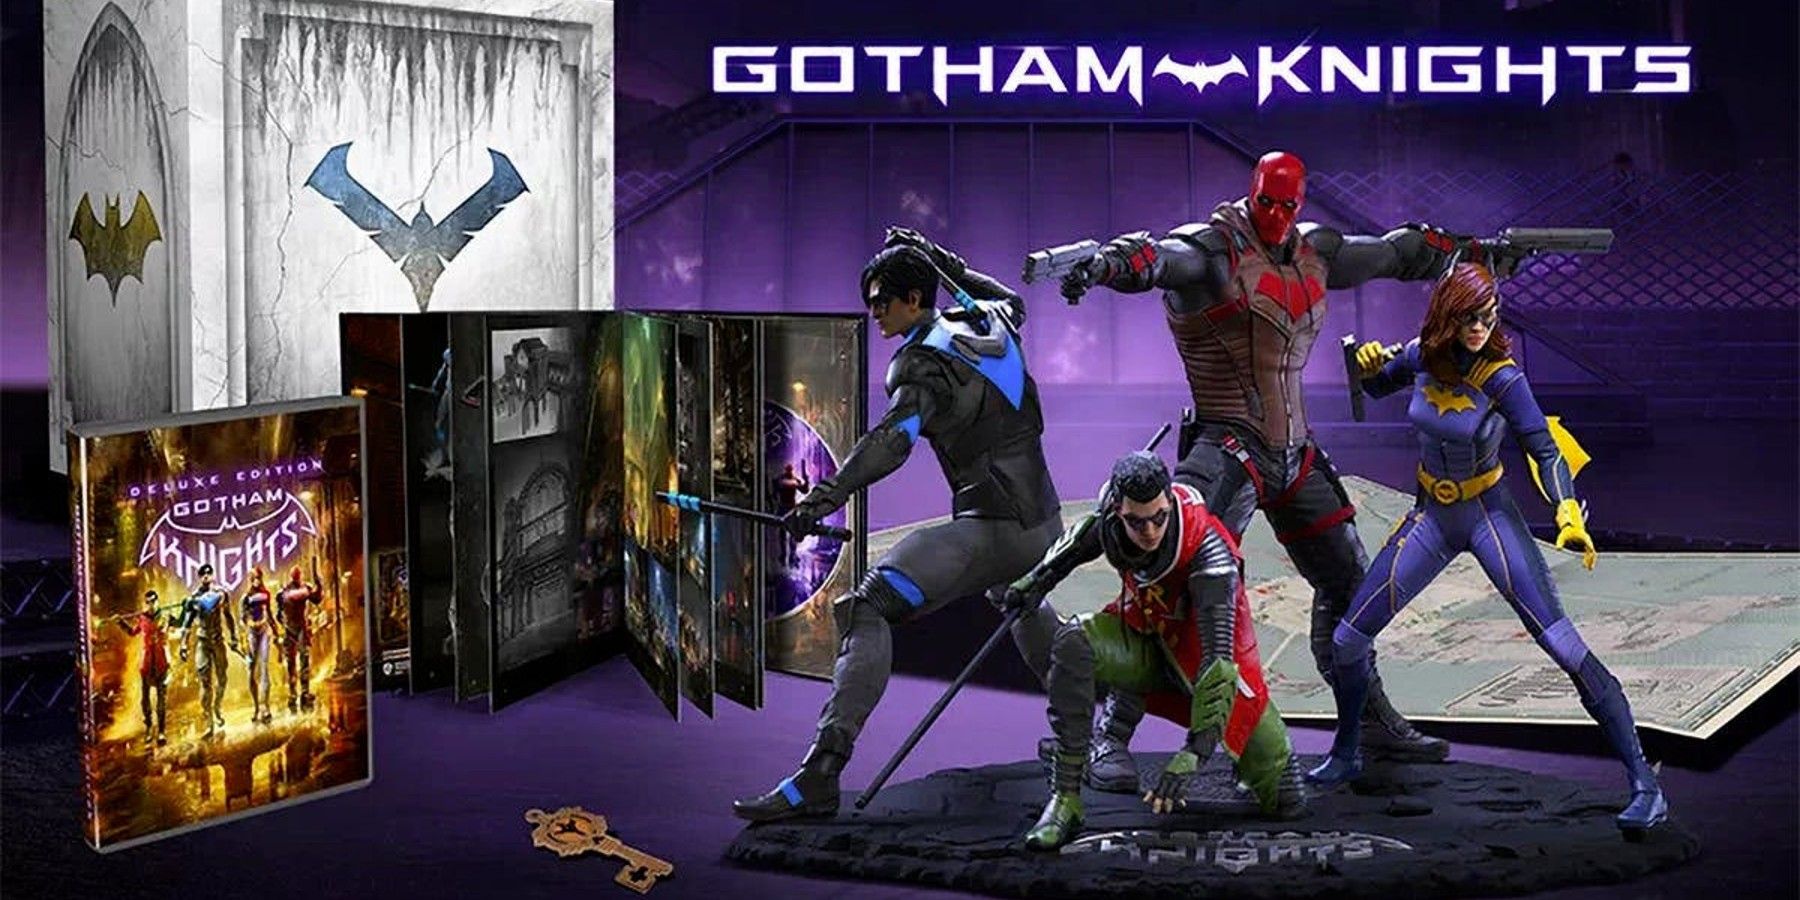 Gotham Knights Collector's Edition